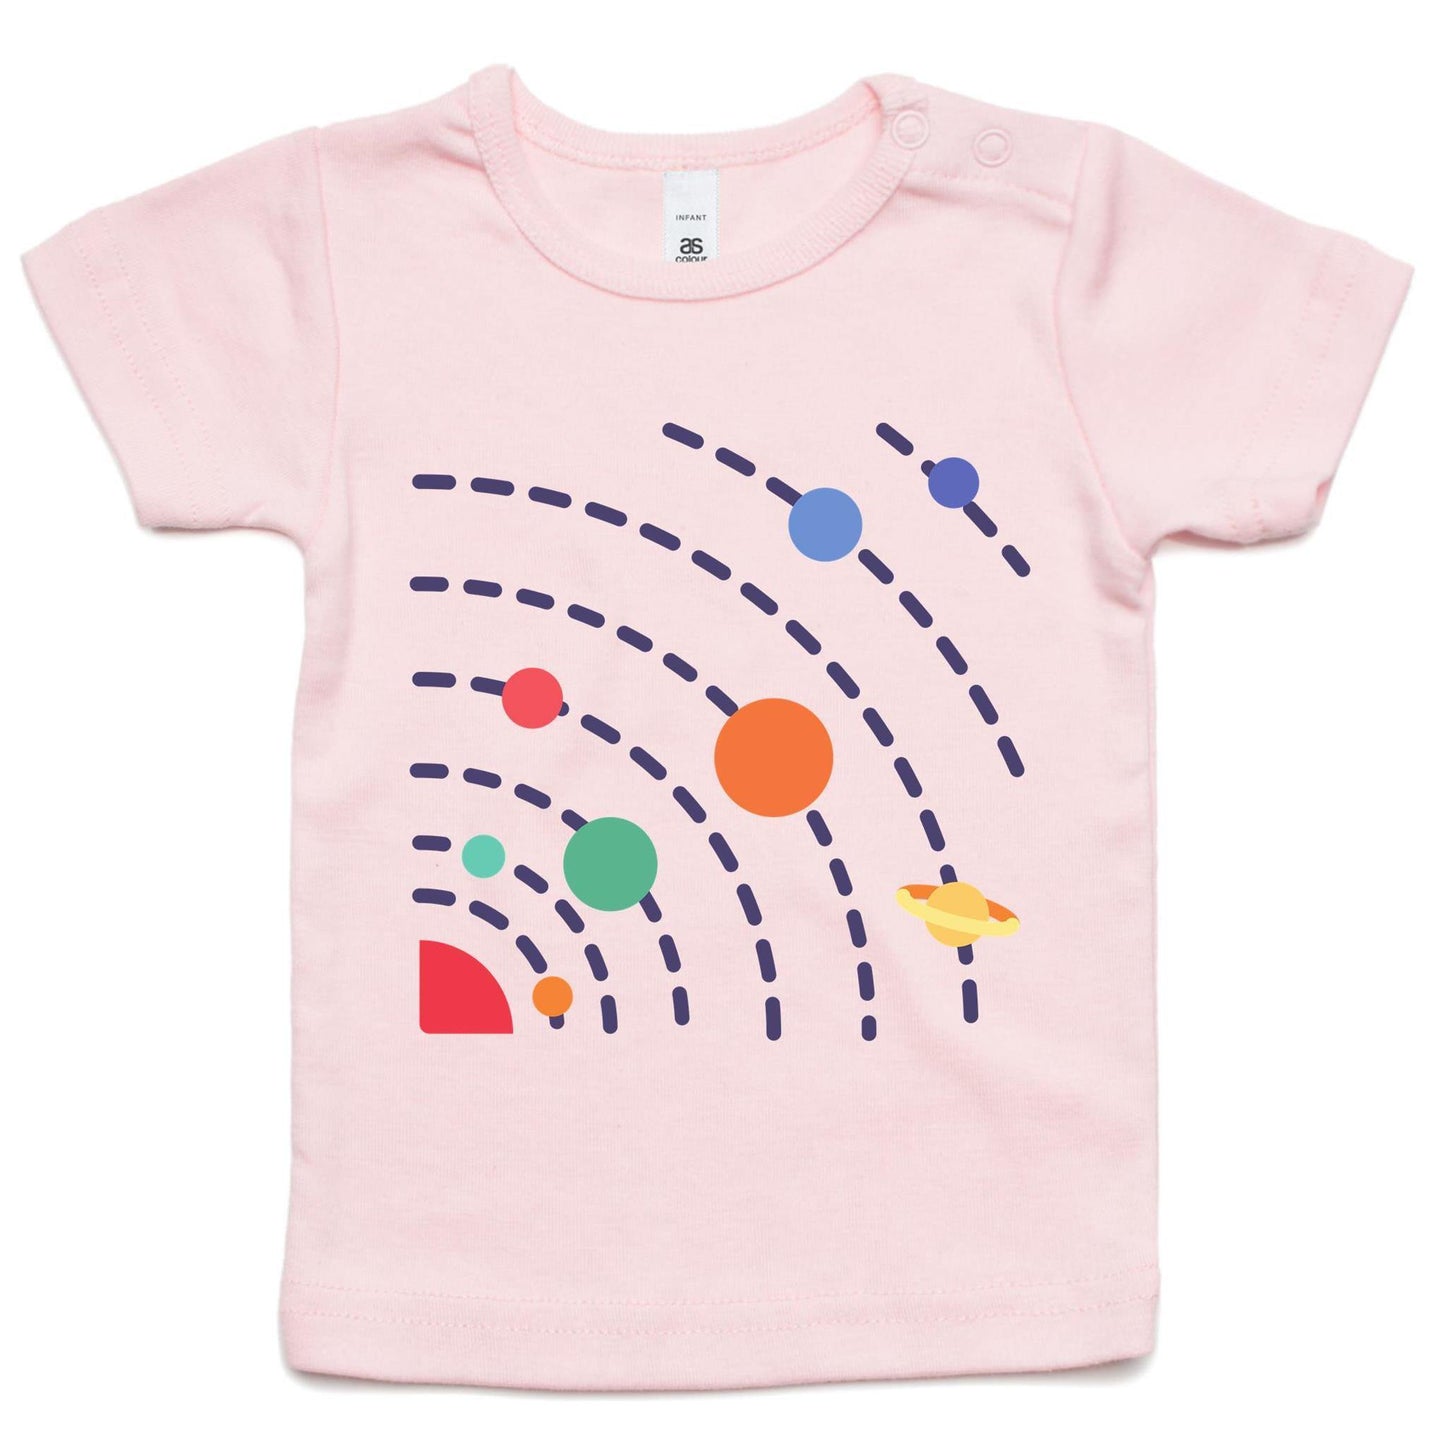 Solar System - Baby T-shirt Pink Baby T-shirt kids Space